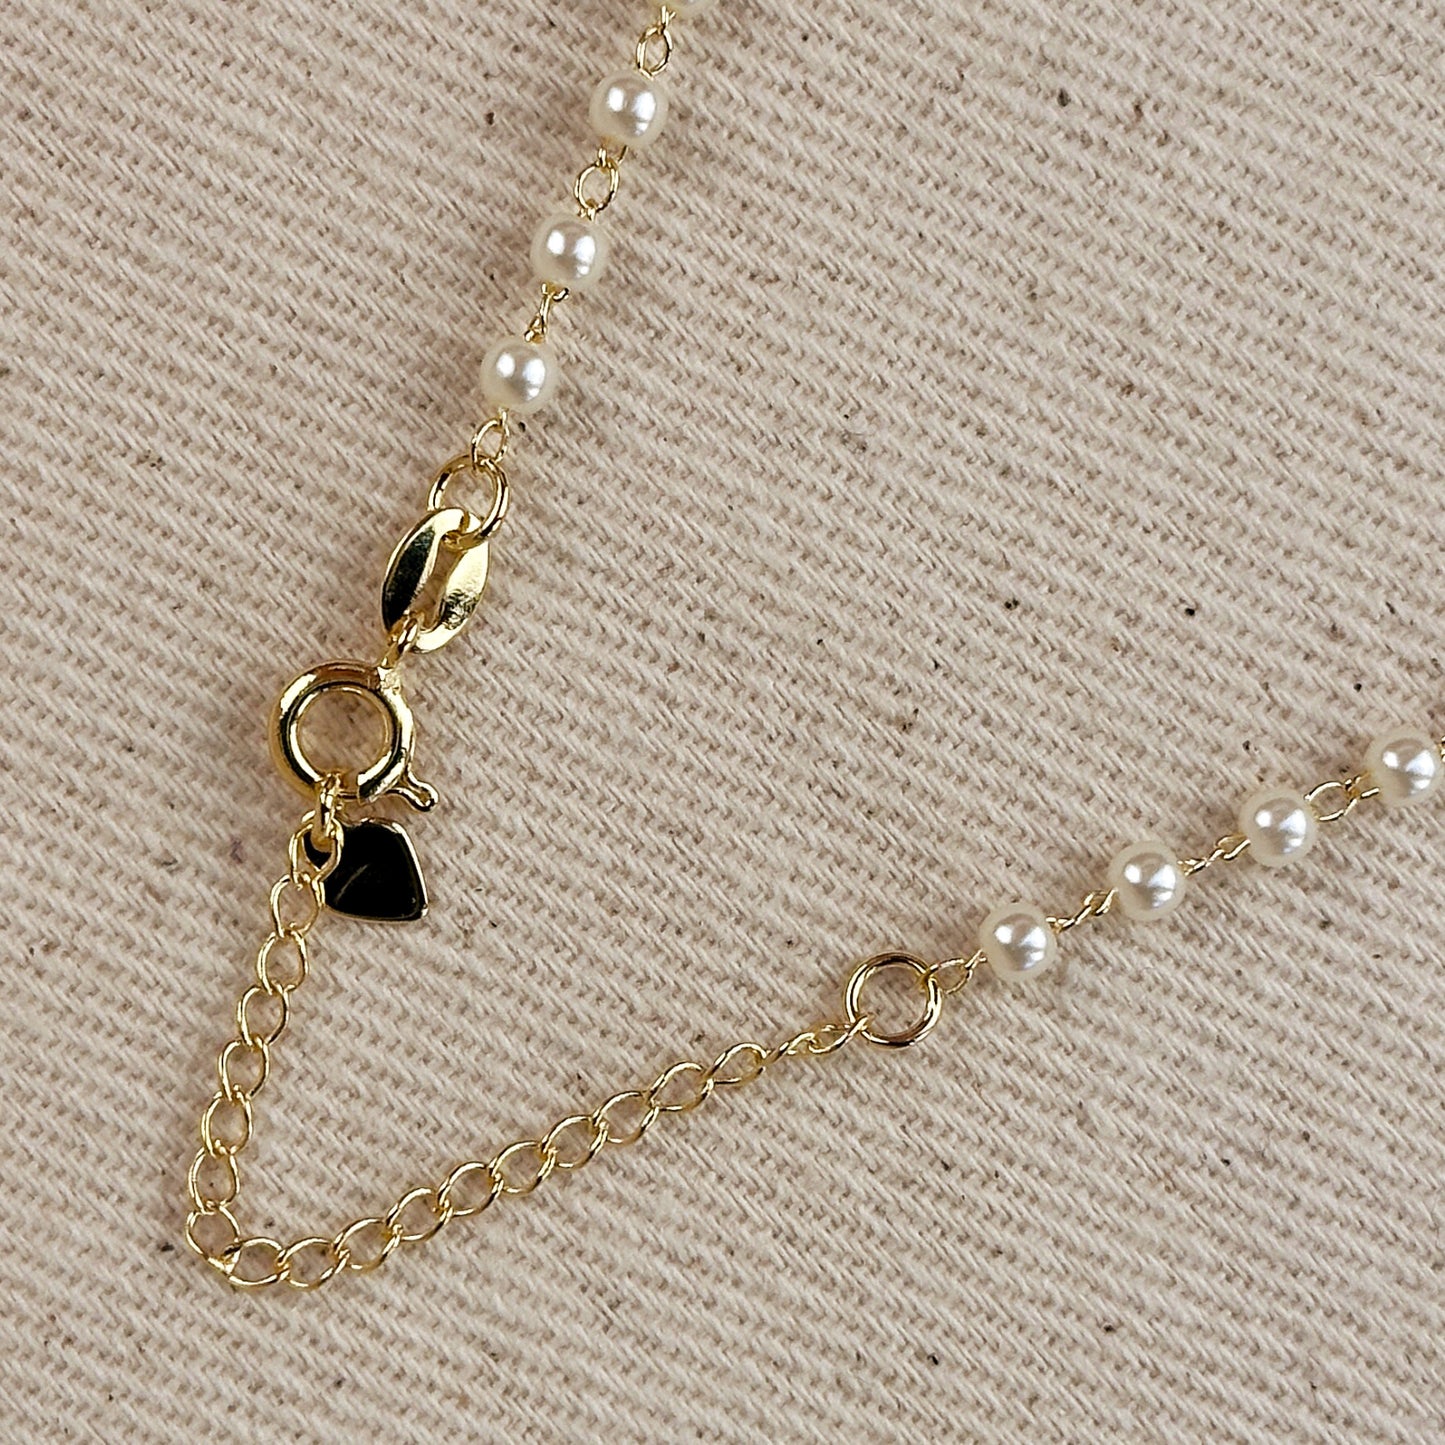 18k Gold Filled 3mm Pearls Choker Necklace